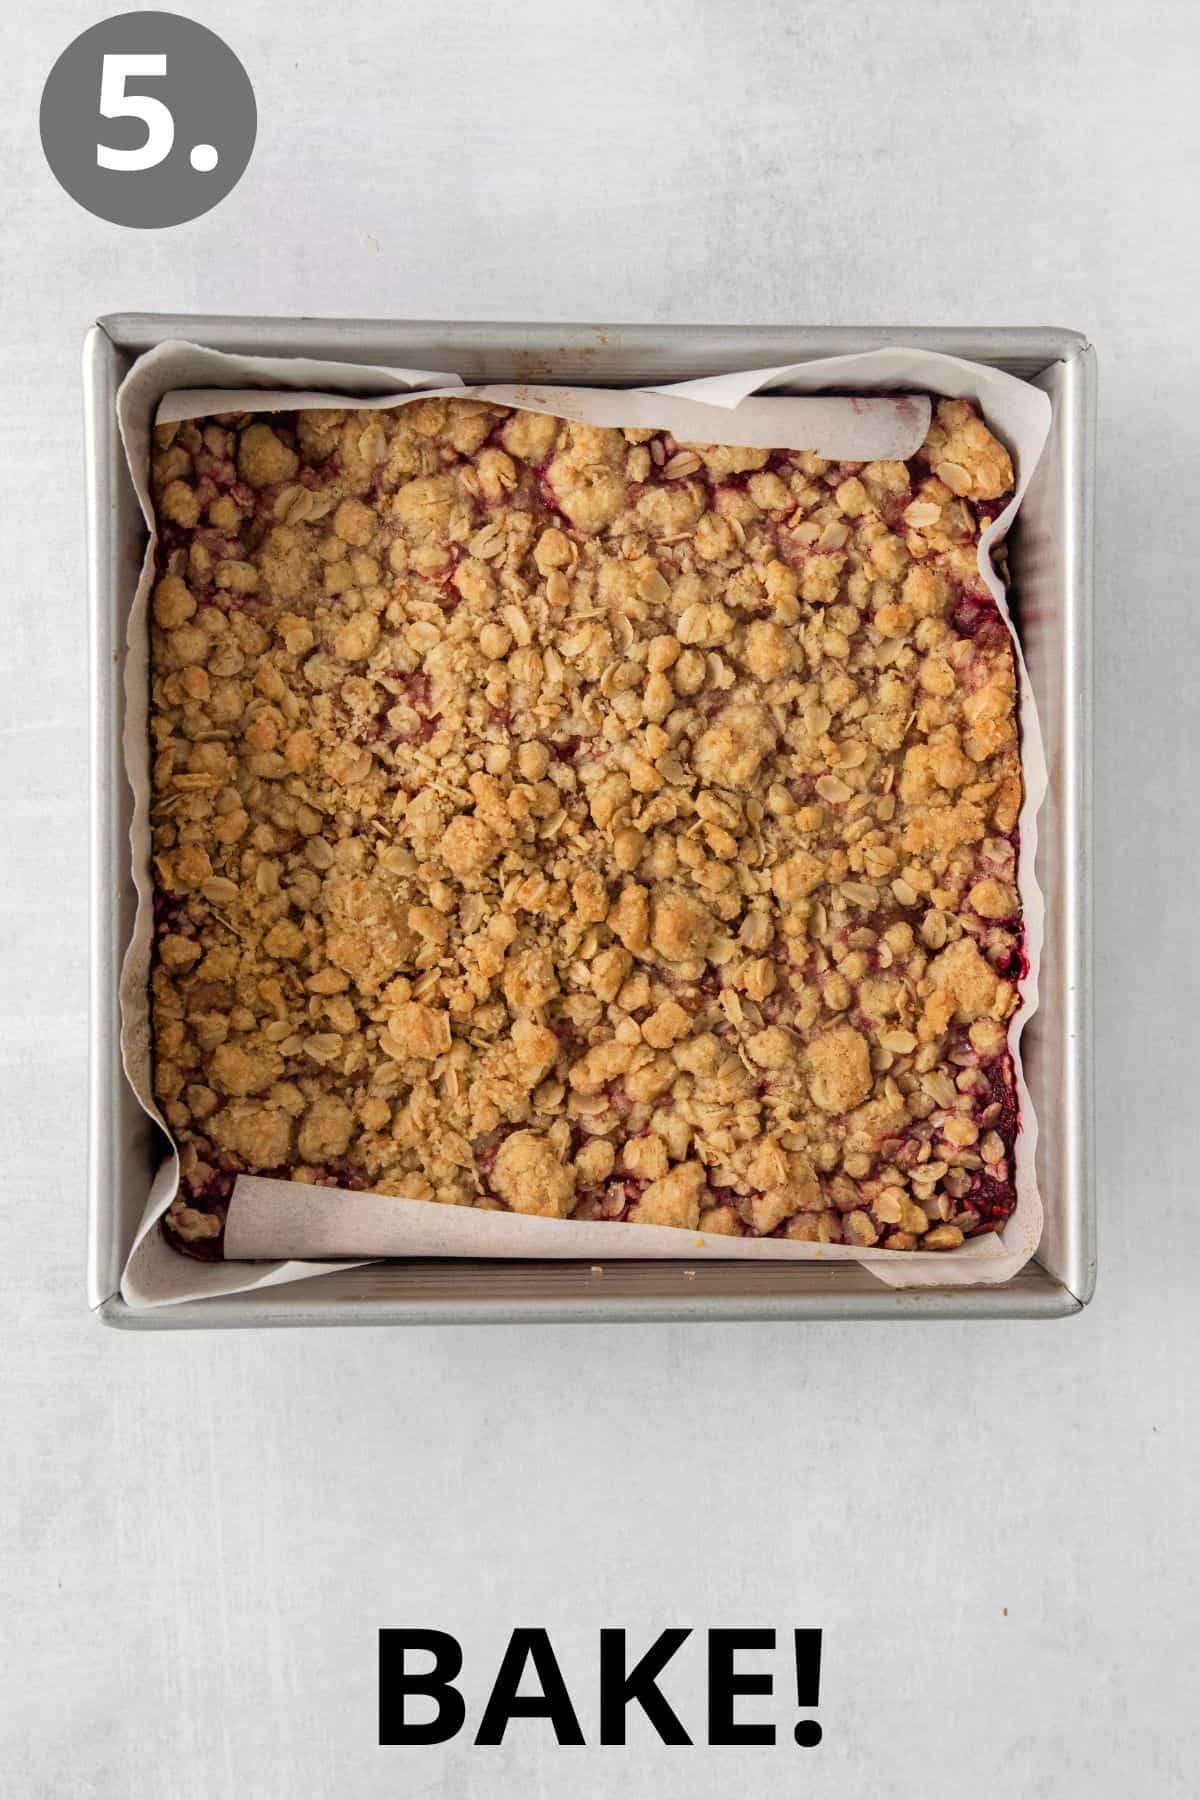 Baked raspberry bars in a baking dish